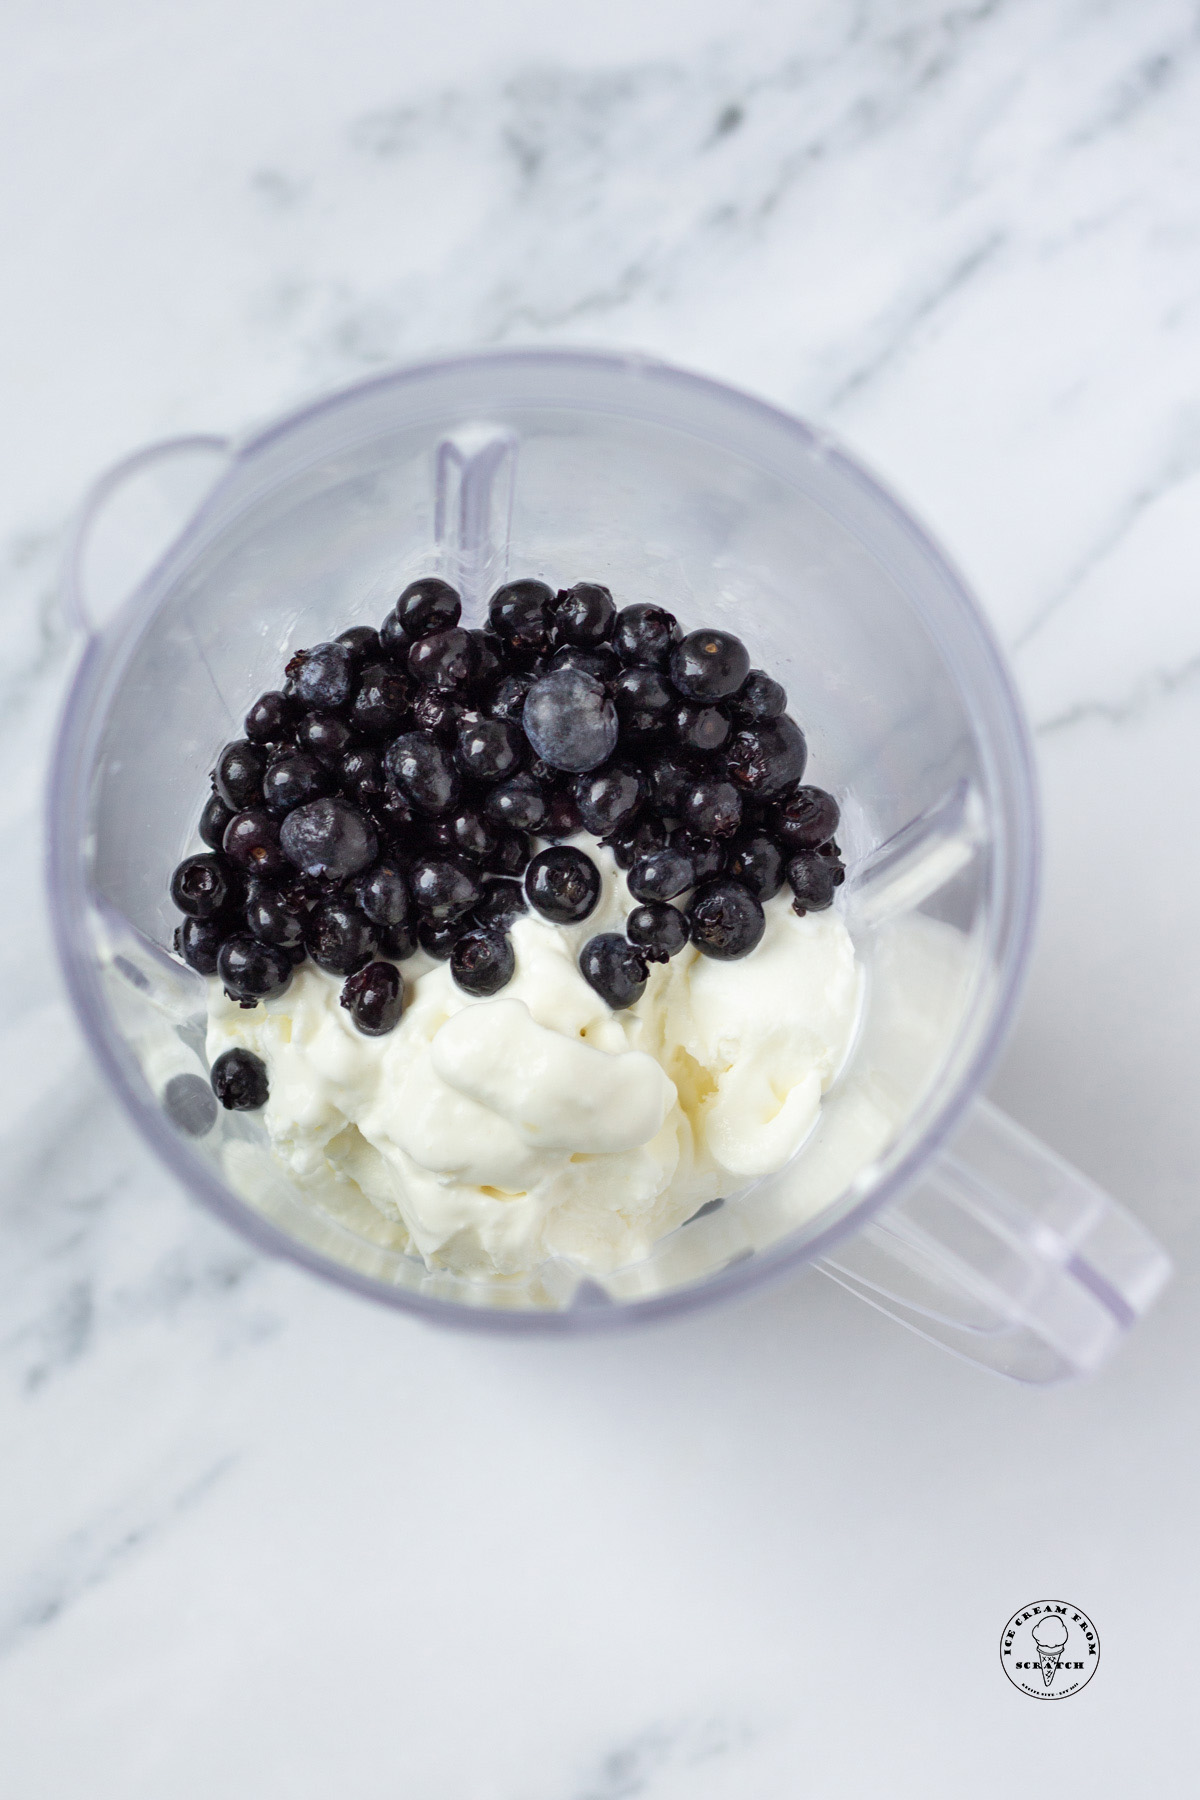 Ice cream and blueberries in a blender, viewed from above